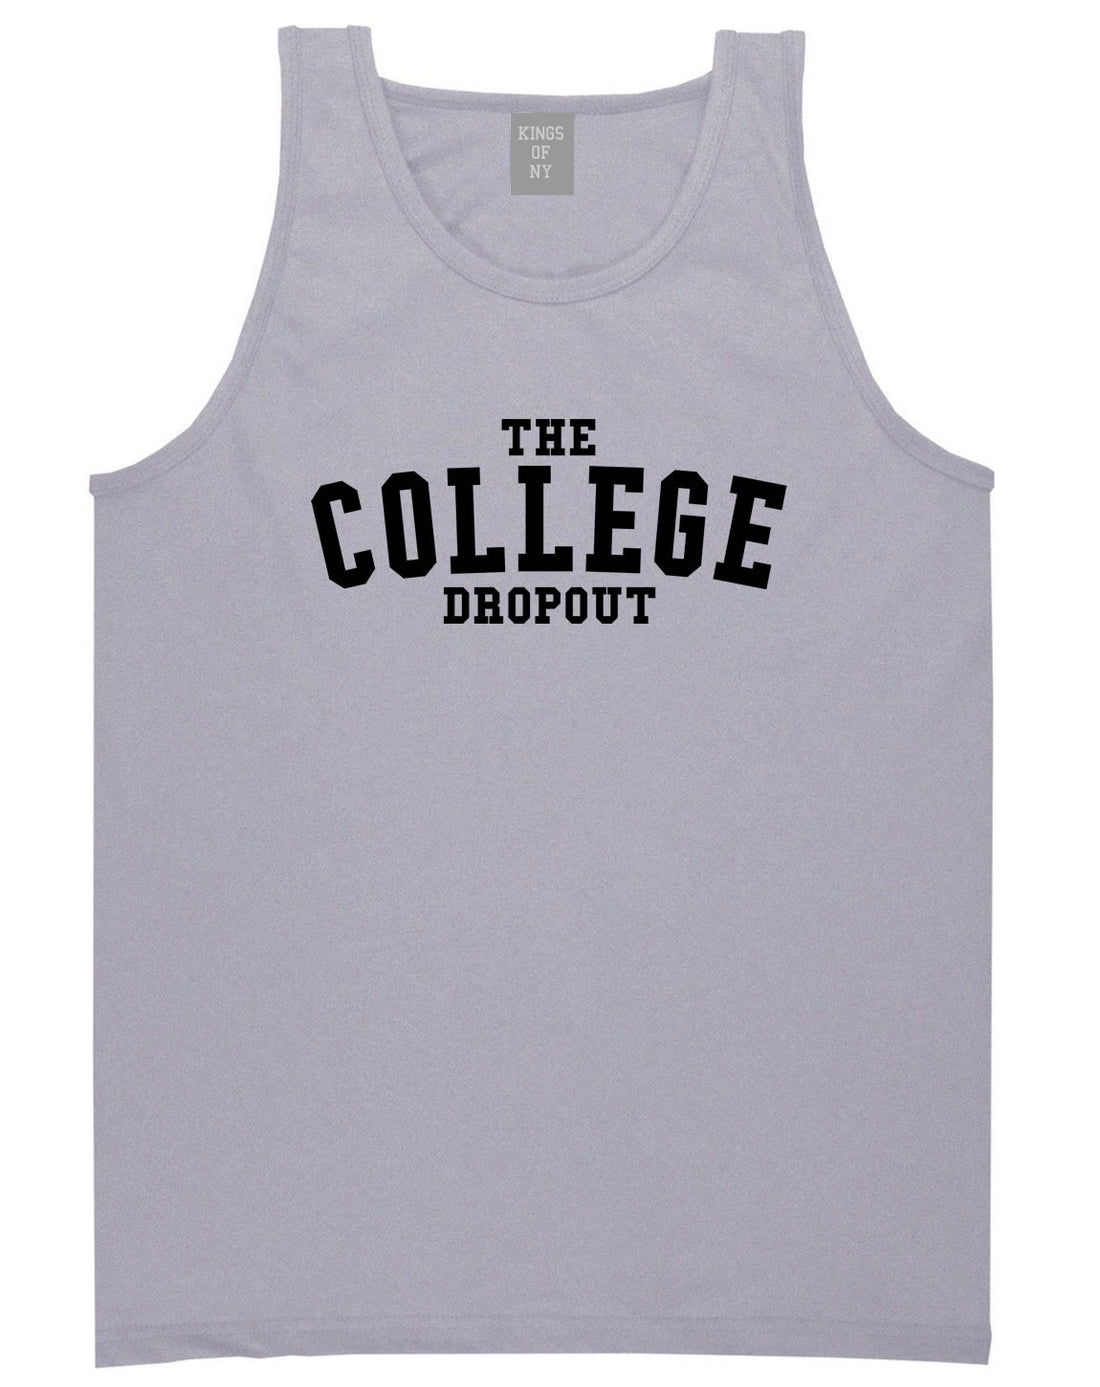 The College Dropout Album High School Tank Top in Grey By Kings Of NY